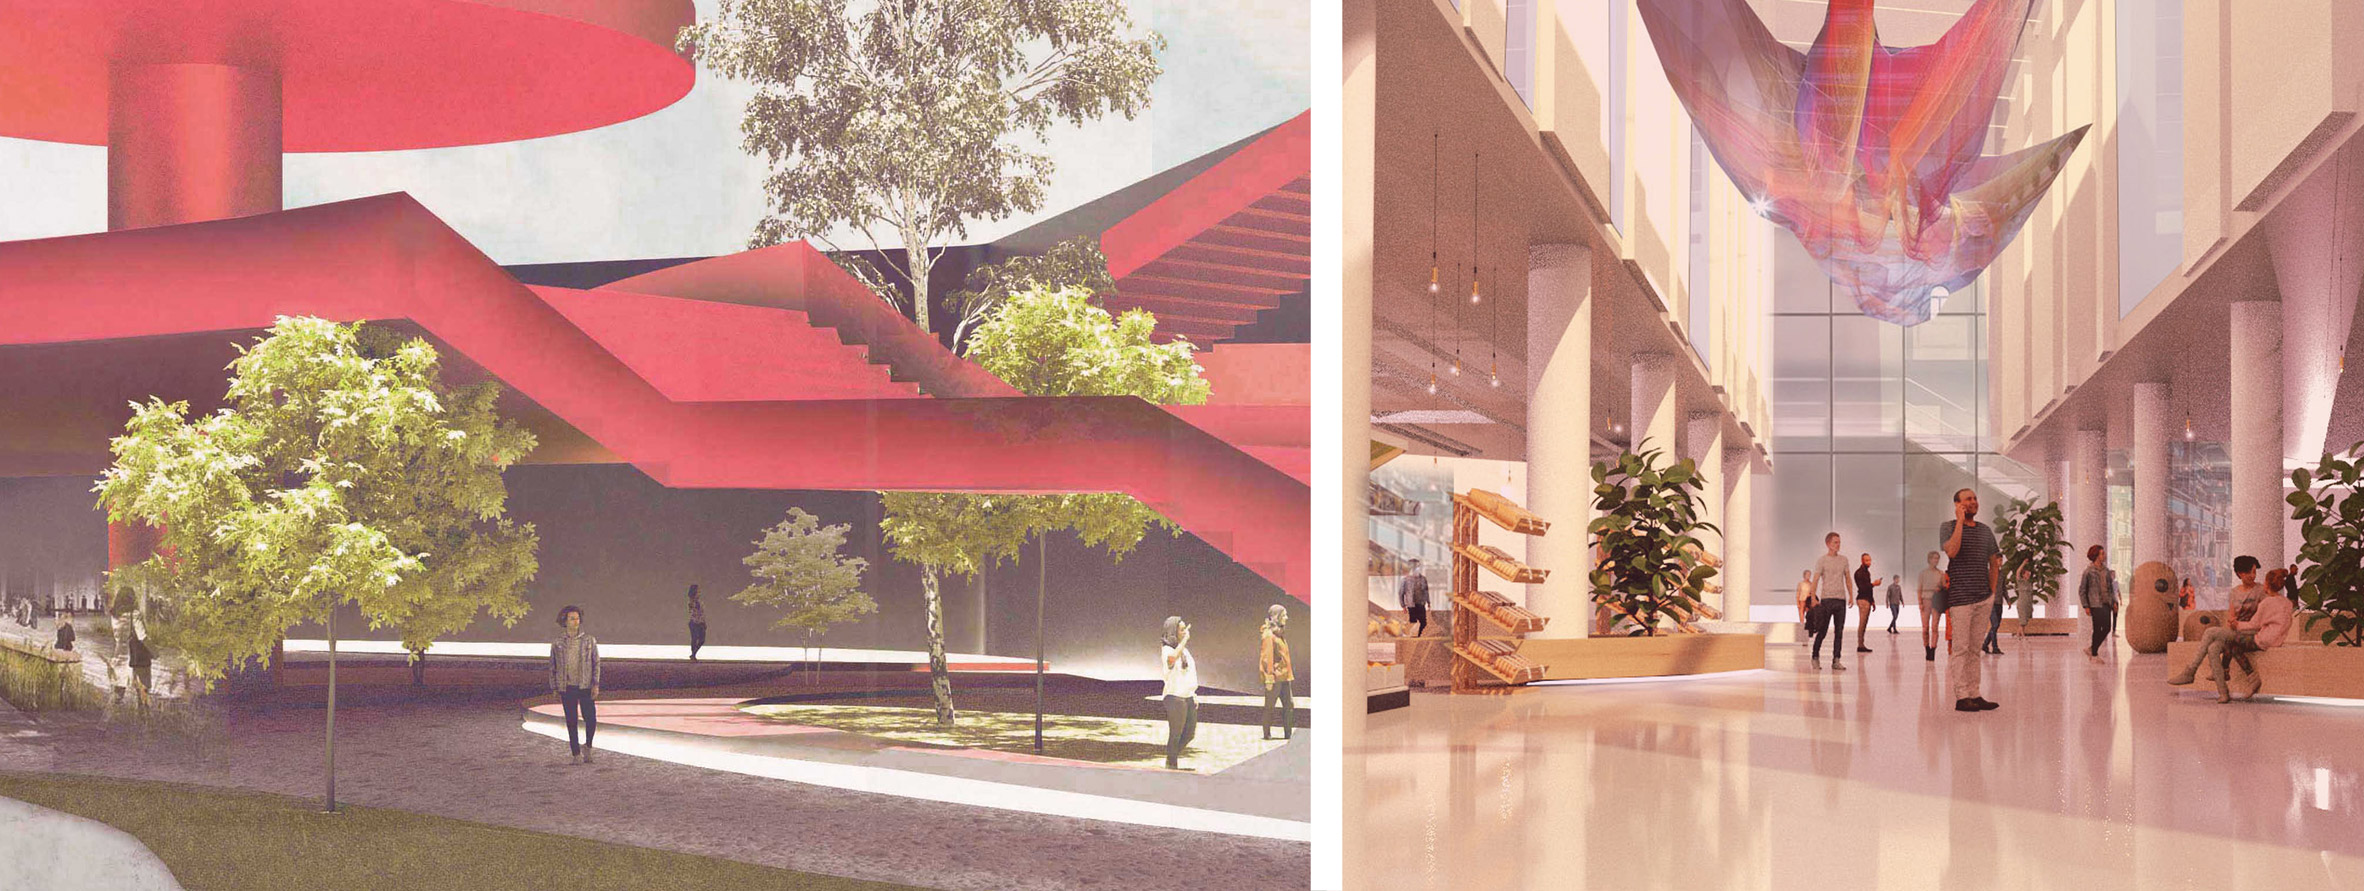 Perspective visualisations of interior and exterior of a town centre enhancement project.